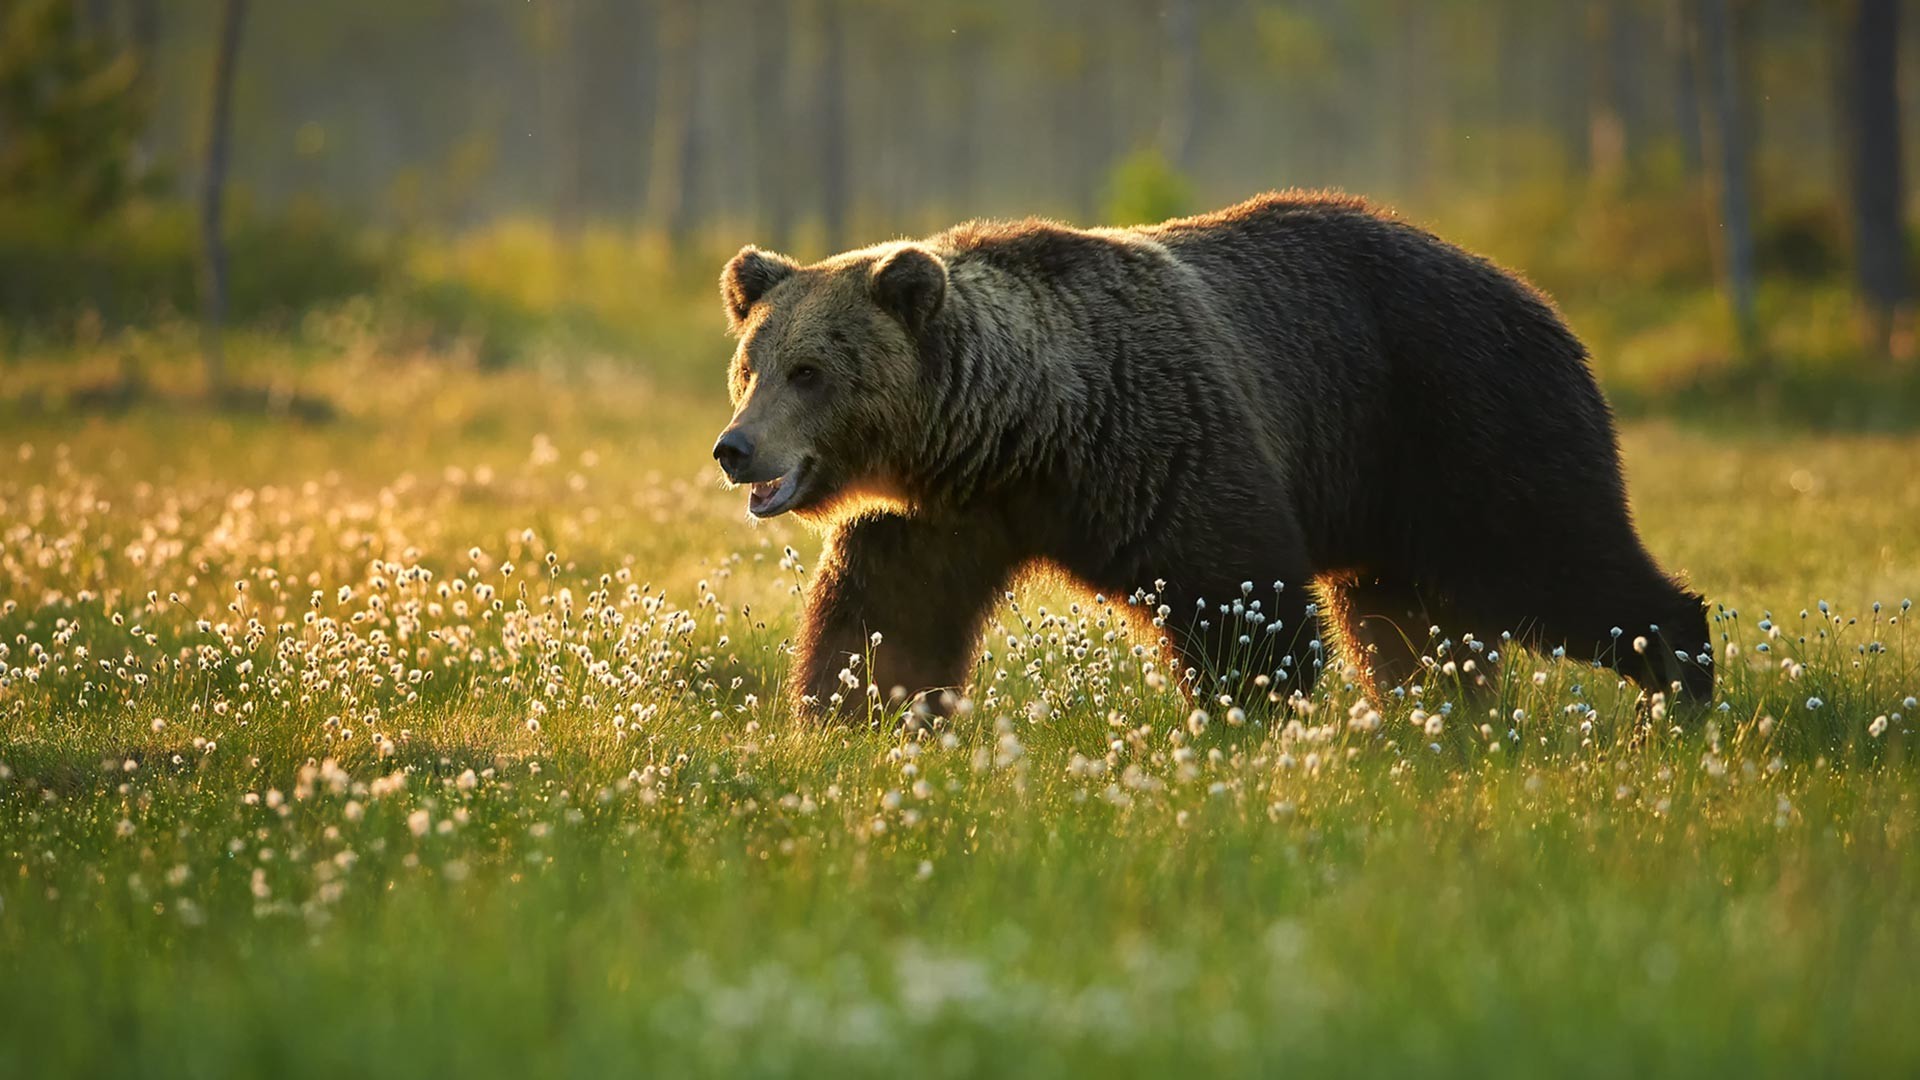 A young brown bear in the wild.